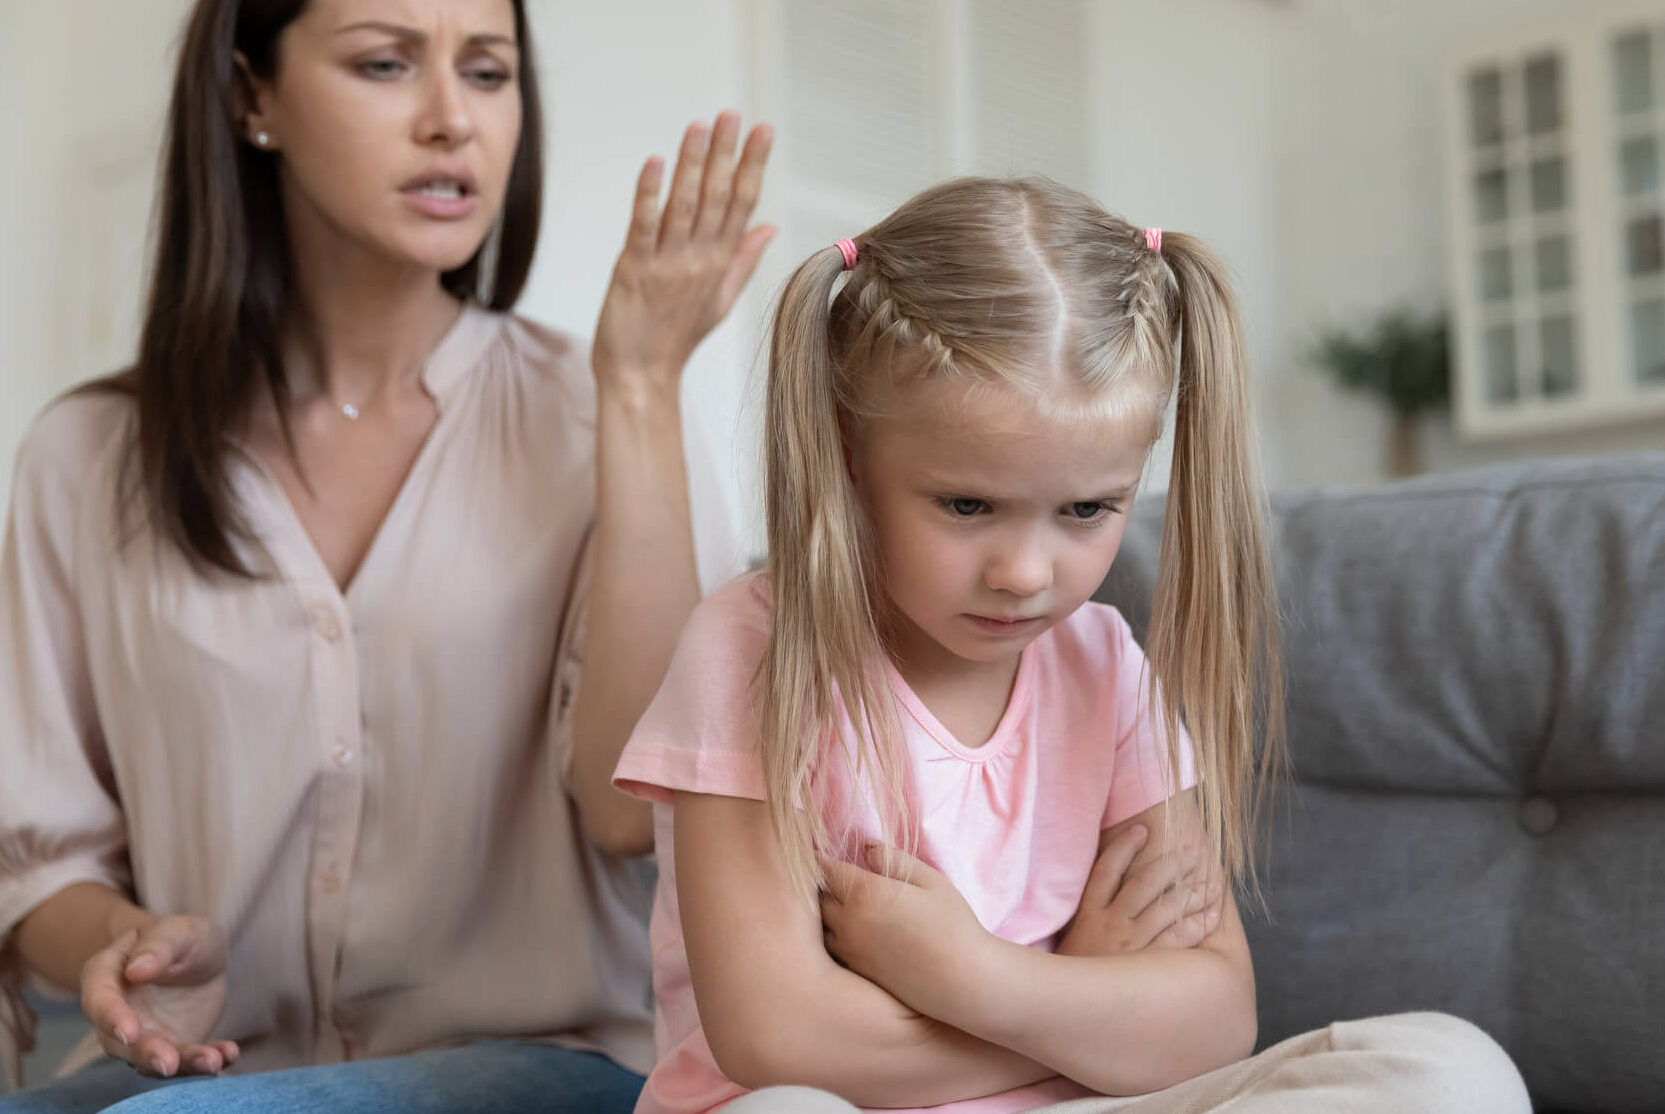 Image of critical mother and upset daughter to depict a pattern of negative childhood experience involving unmet emotional needs that unpin the development of early maladaptive schema